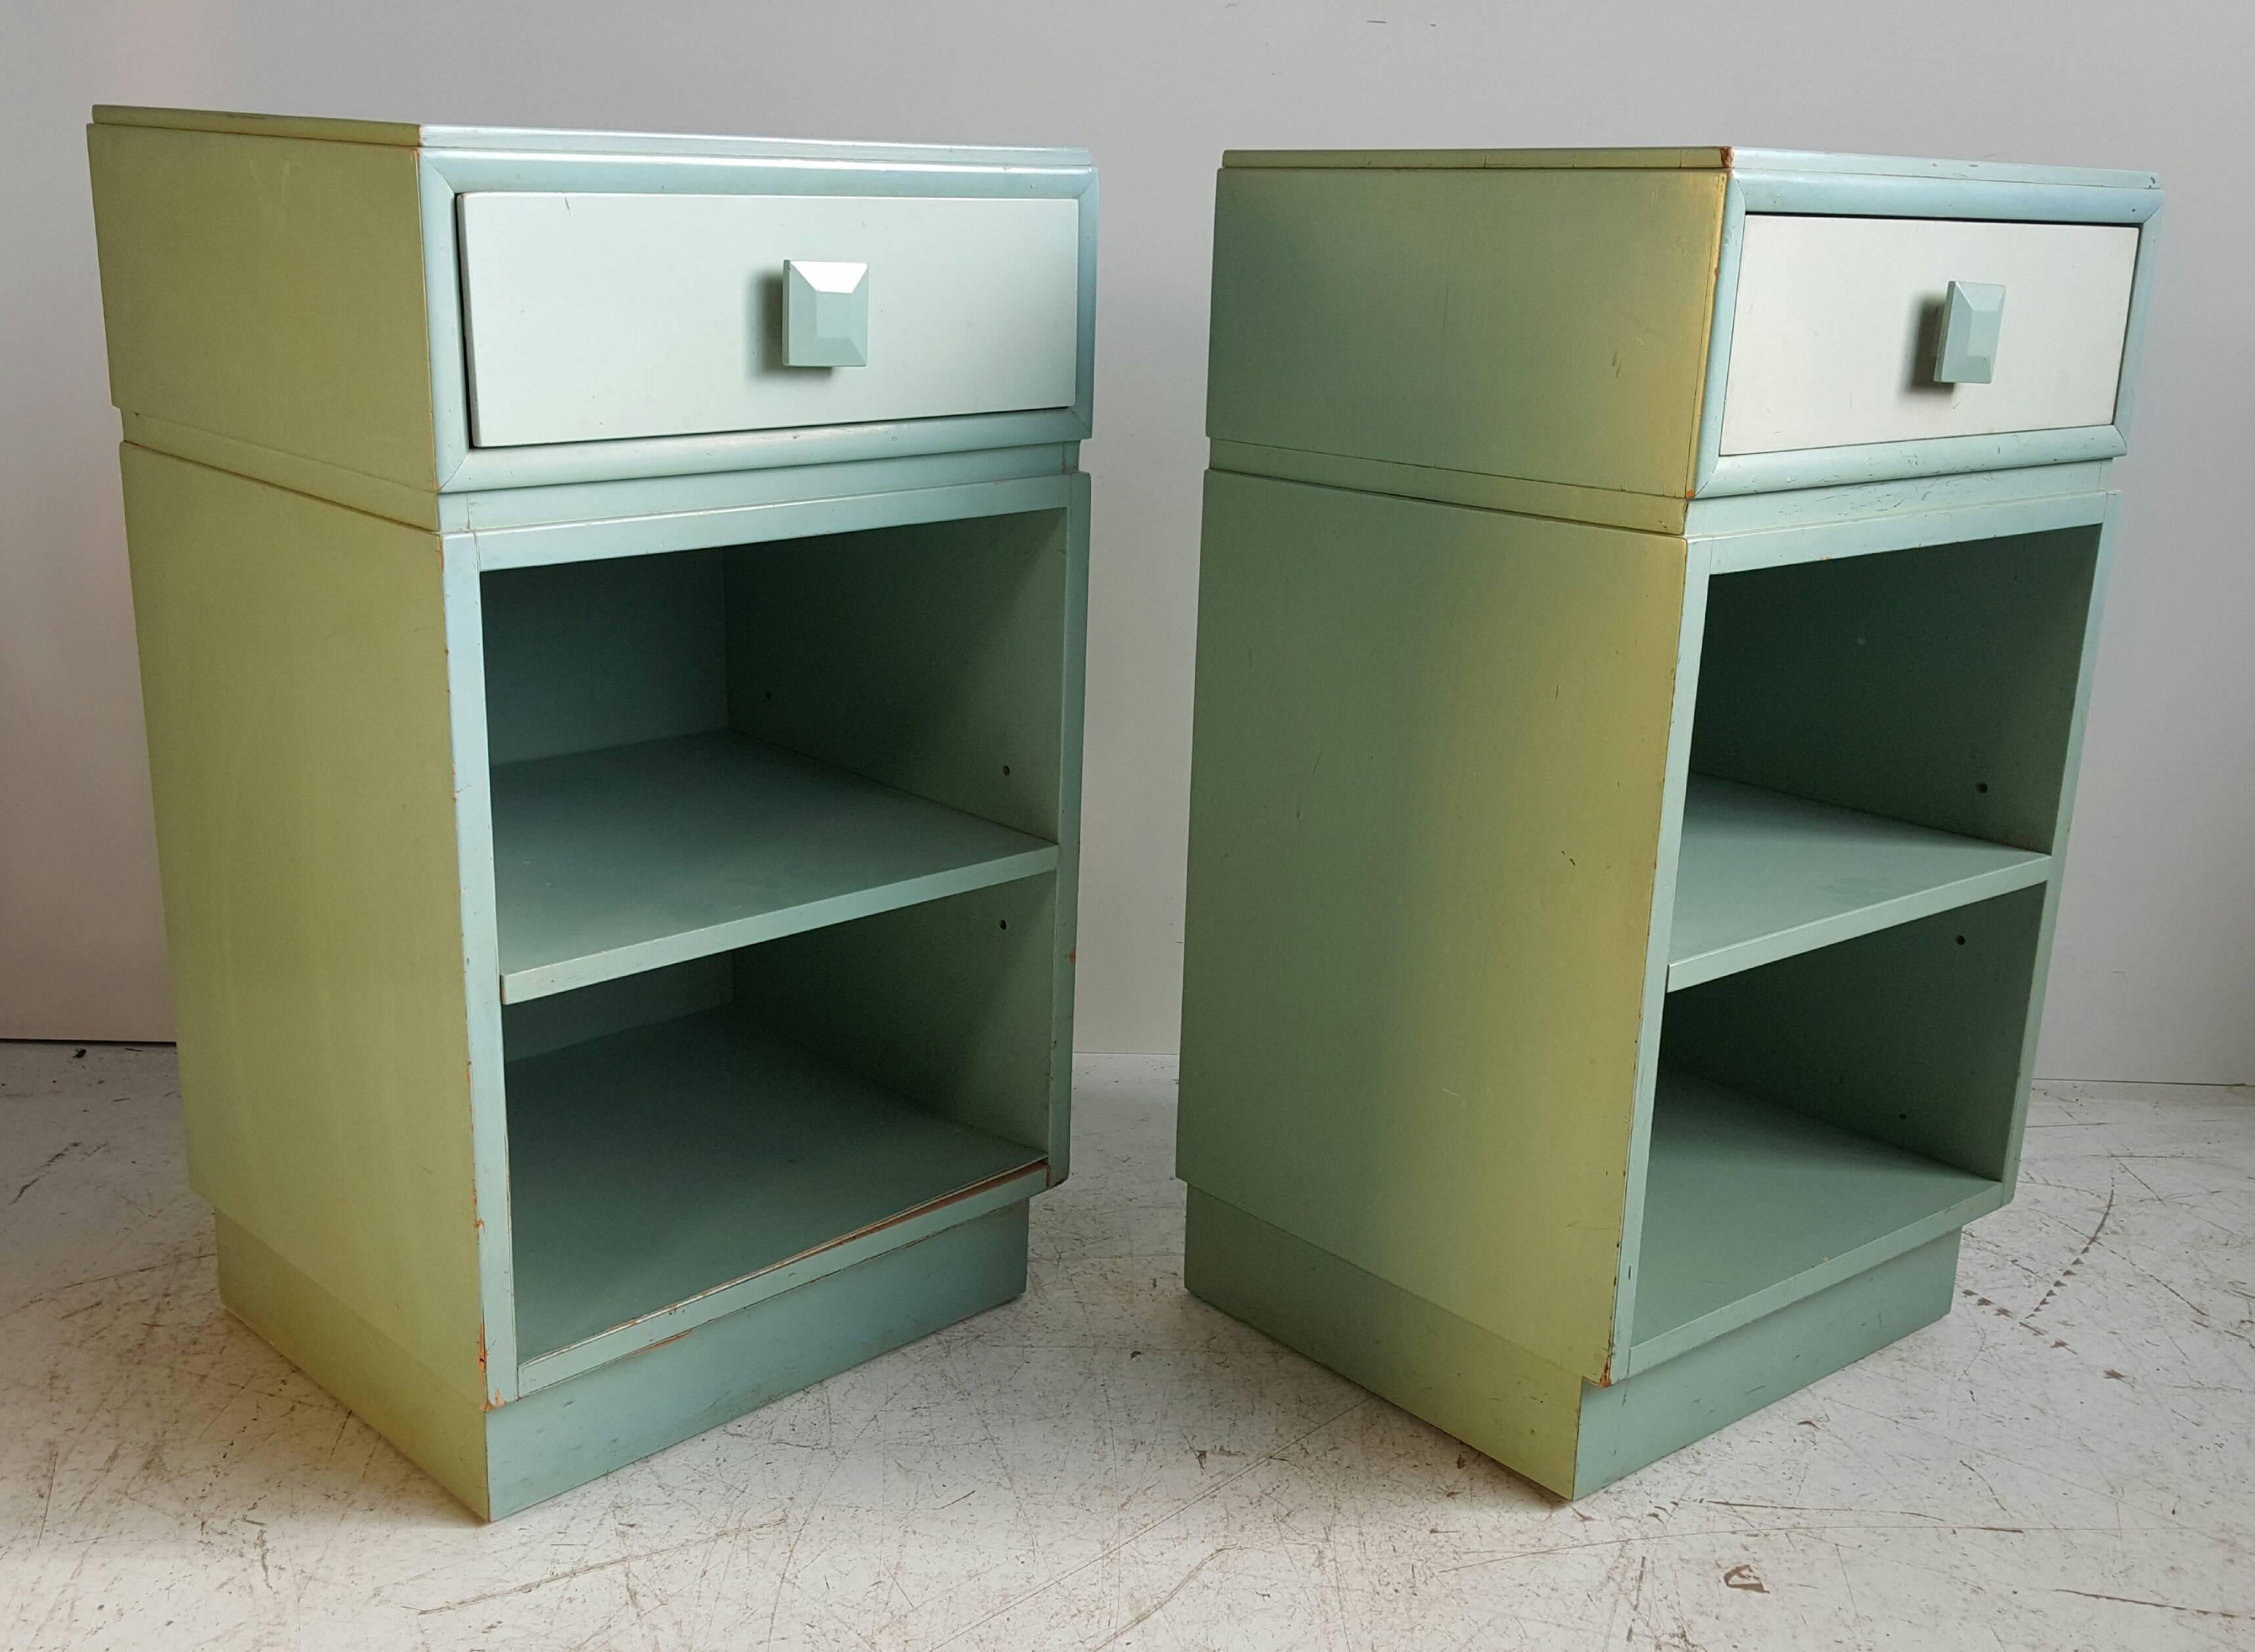 Great pair of 1940s side tables with drawer. The two-tone finish in original factory paint, visible wear. Shelf is adjustable. Drawer marked with Kittinger foil label.